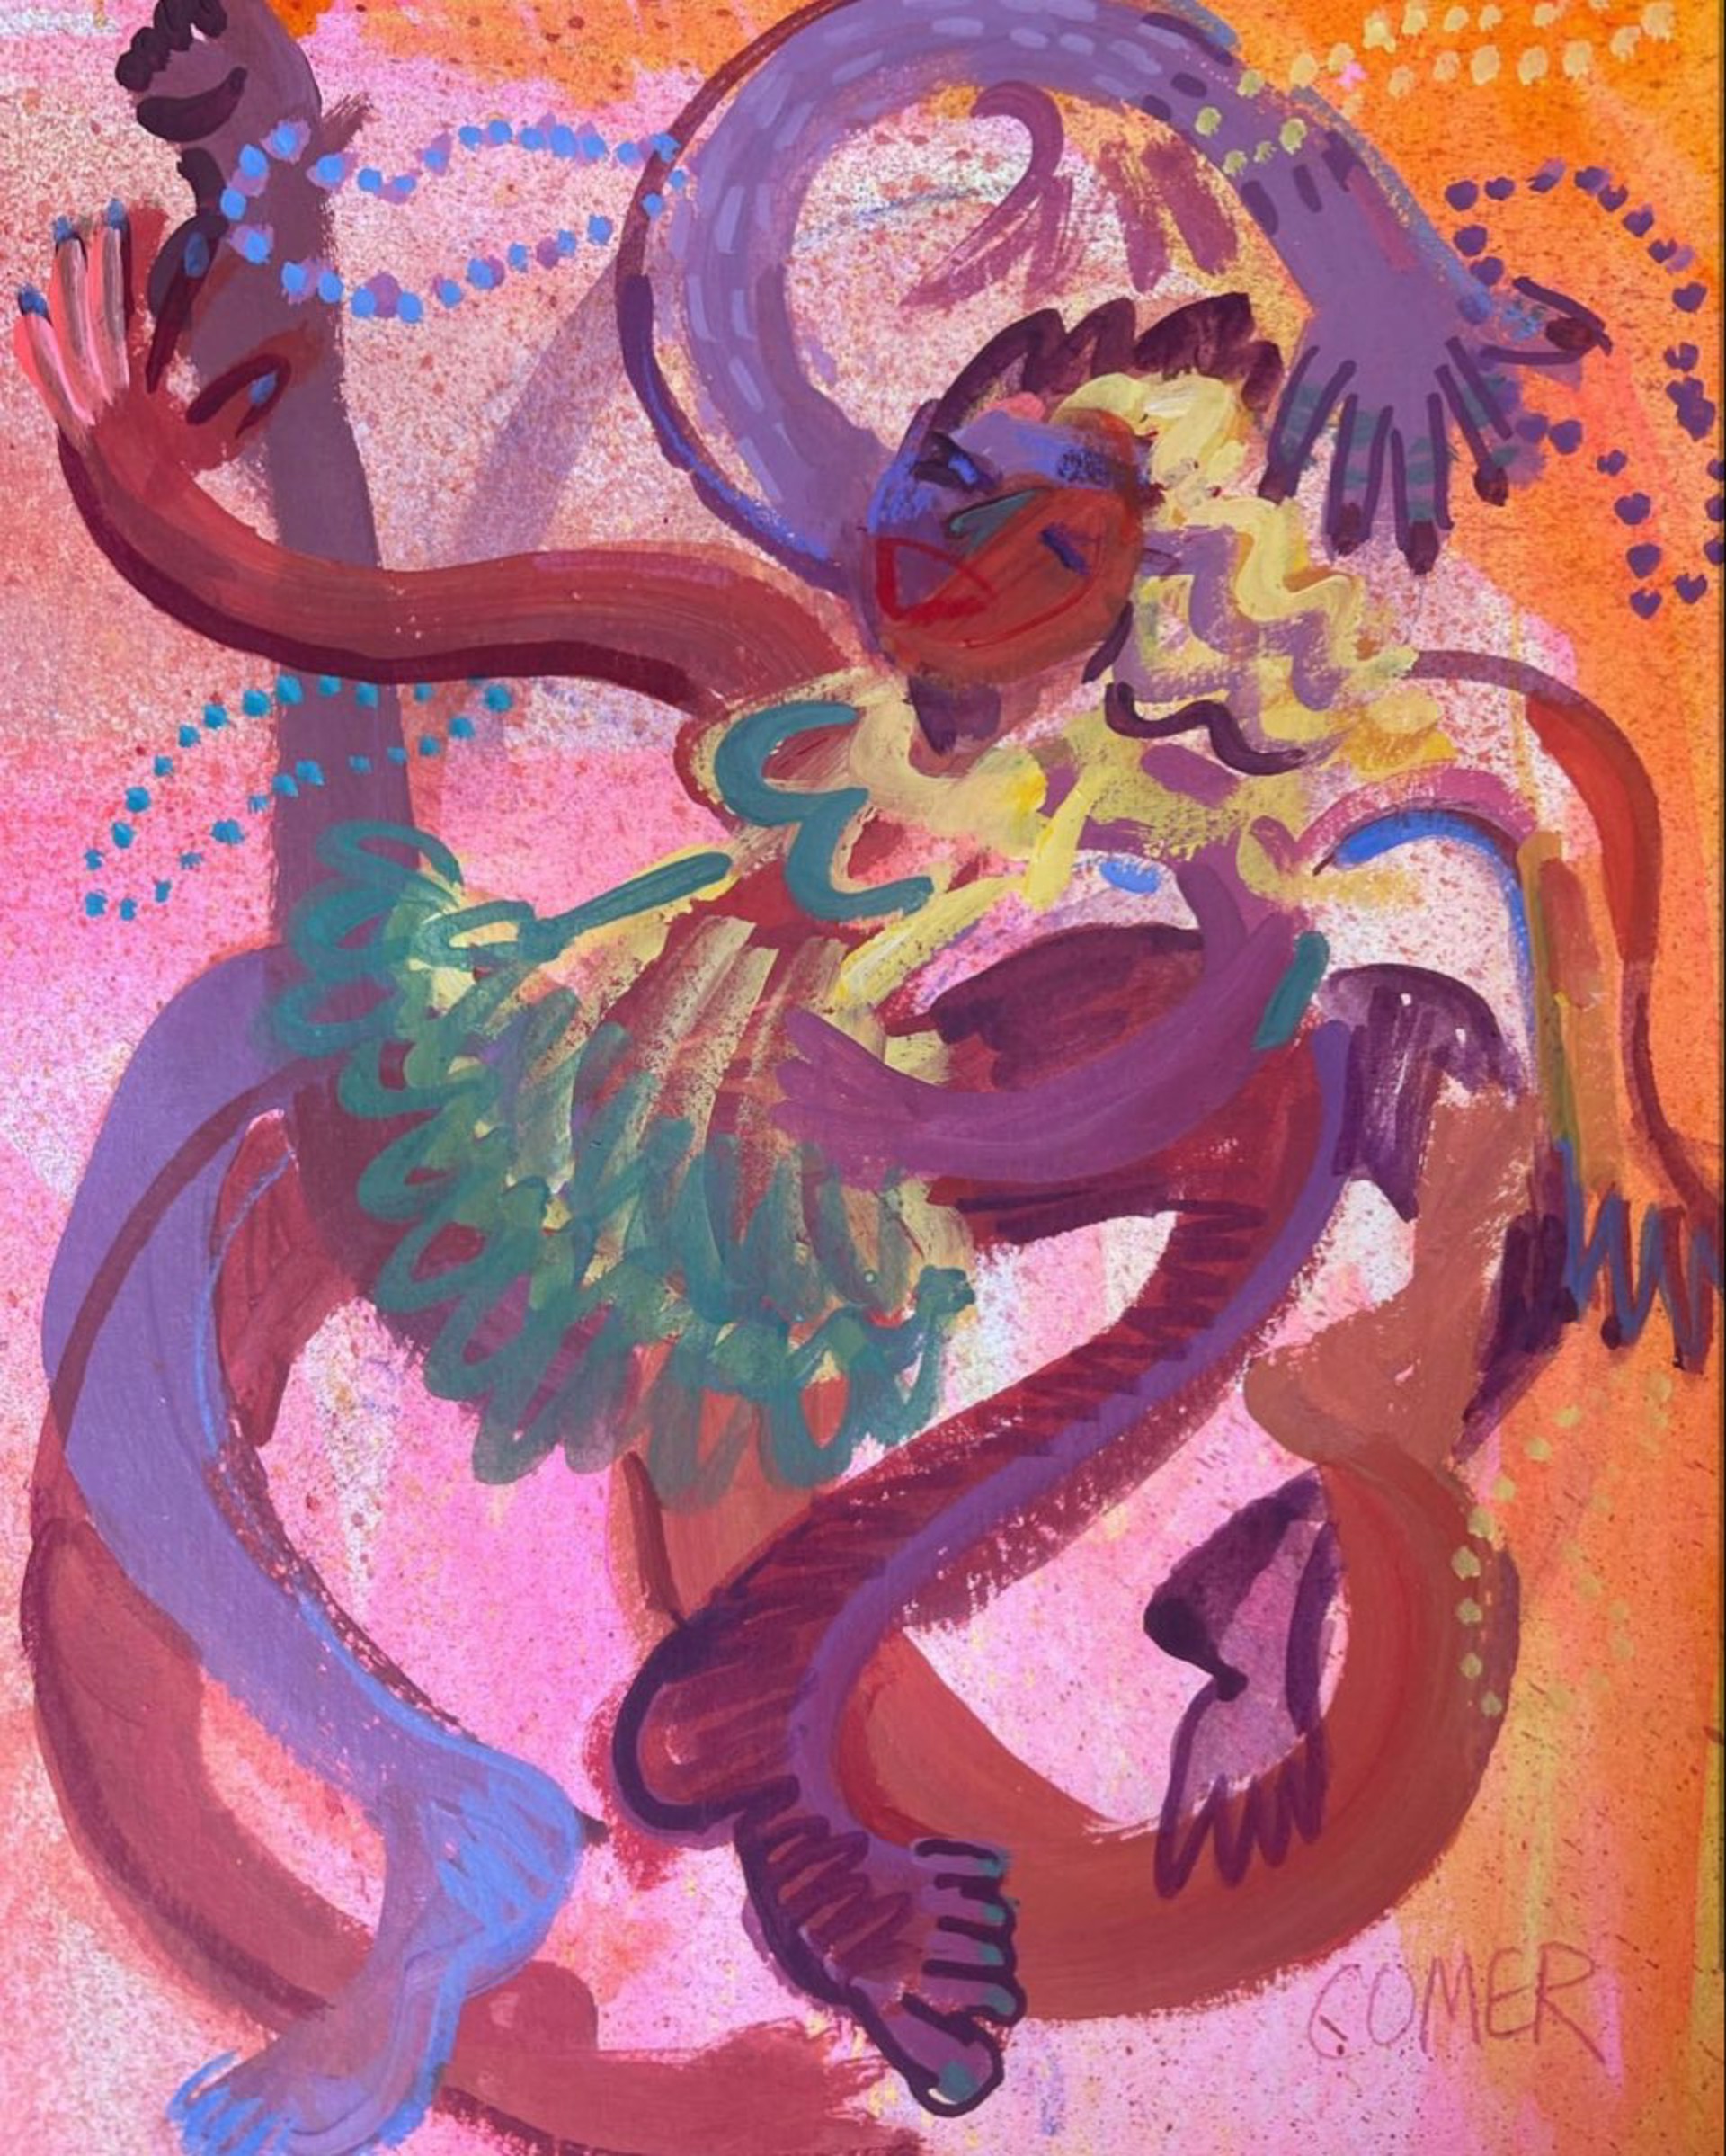 Revelry Dancer by Colleen Terrell Comer